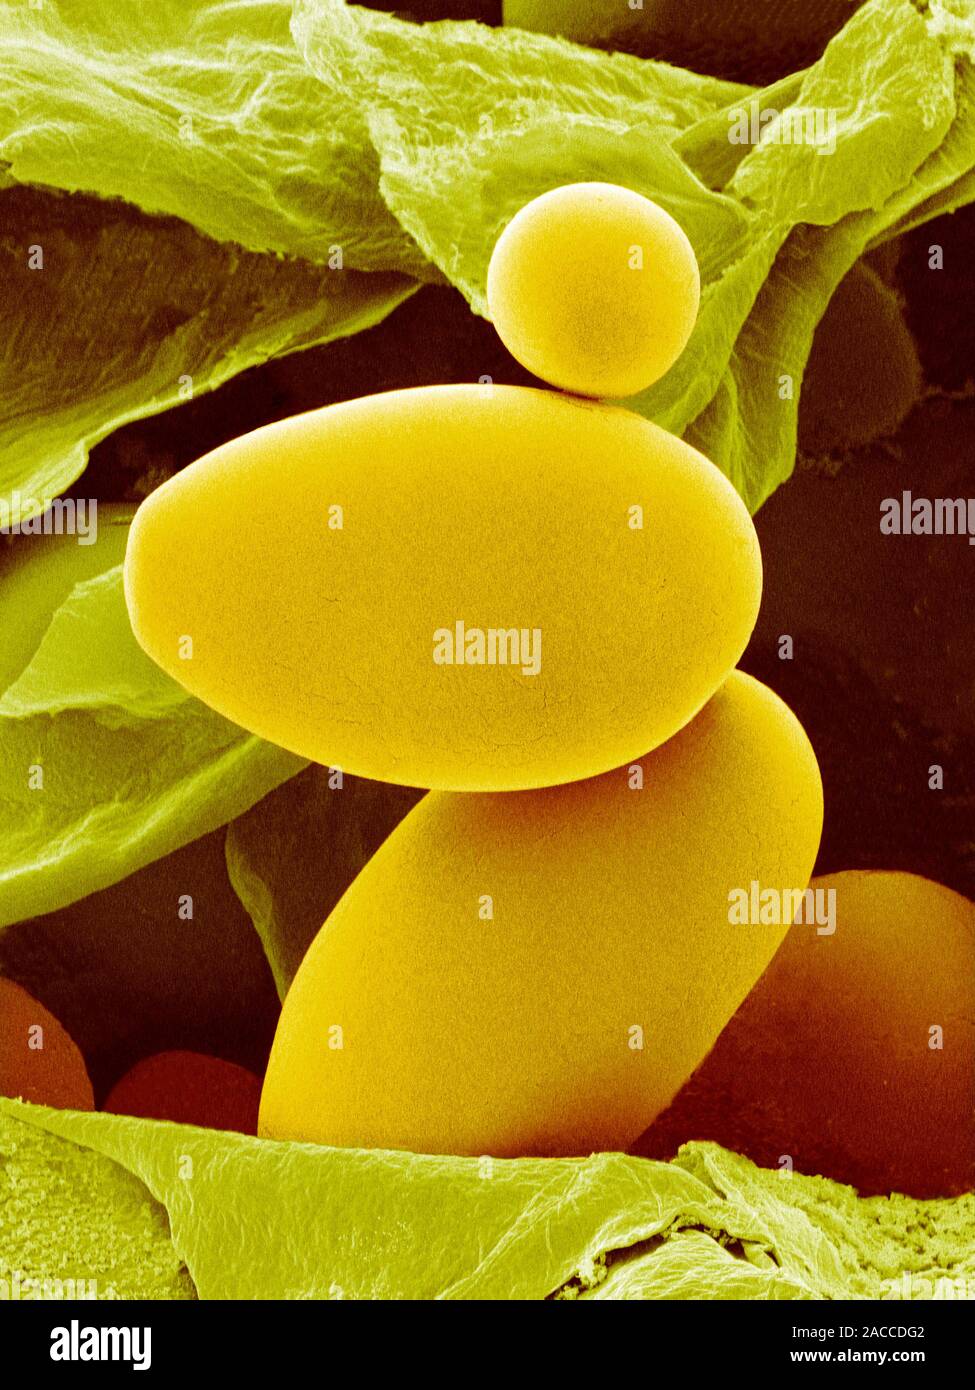 Potato starch. Coloured scanning electron micrograph (SEM) of starch ...